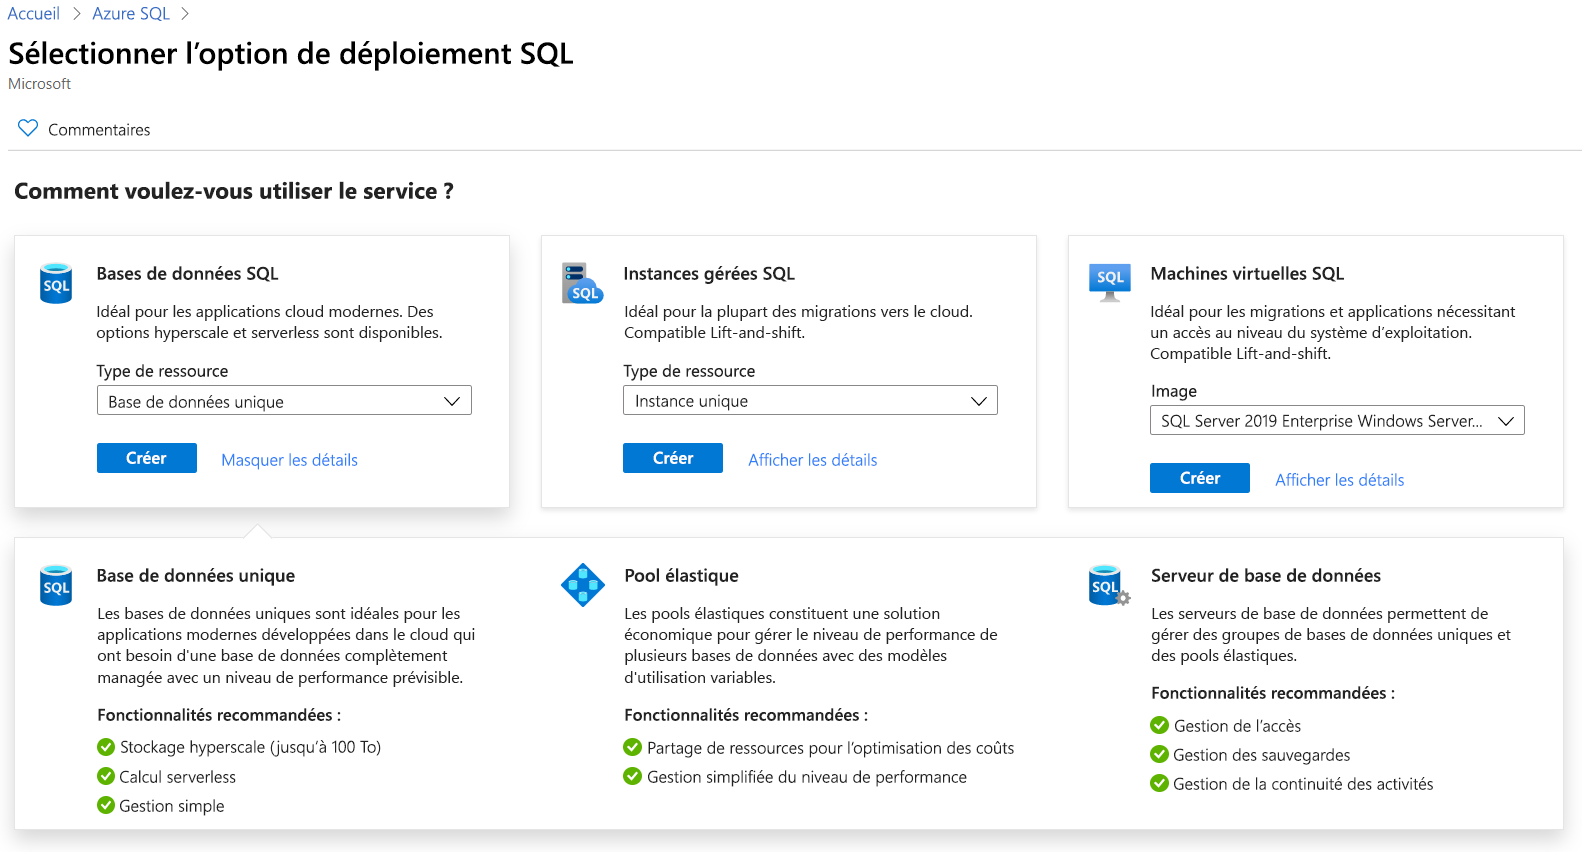 Screenshot that shows the Azure SQL deployment options in the Azure portal.